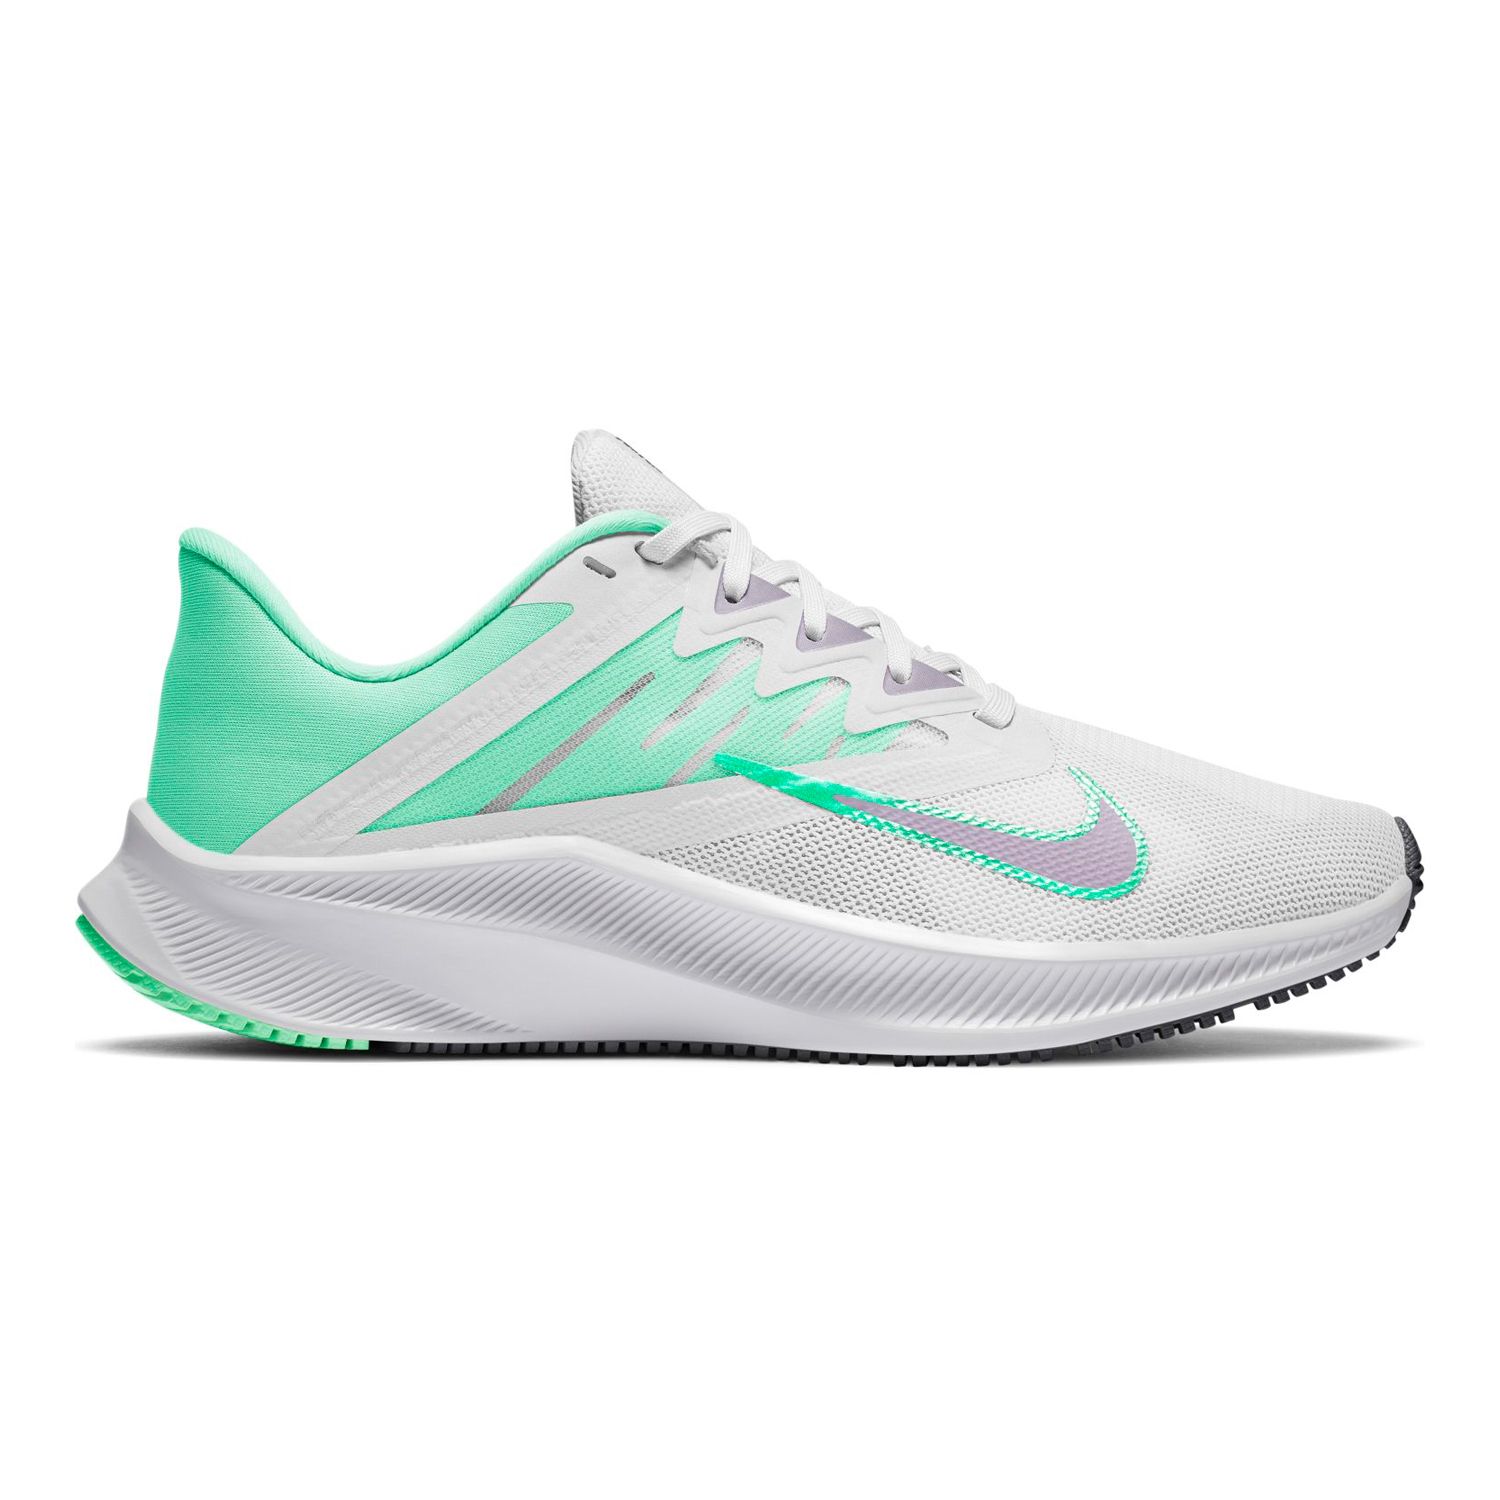 nike quest 3 ladies running shoes